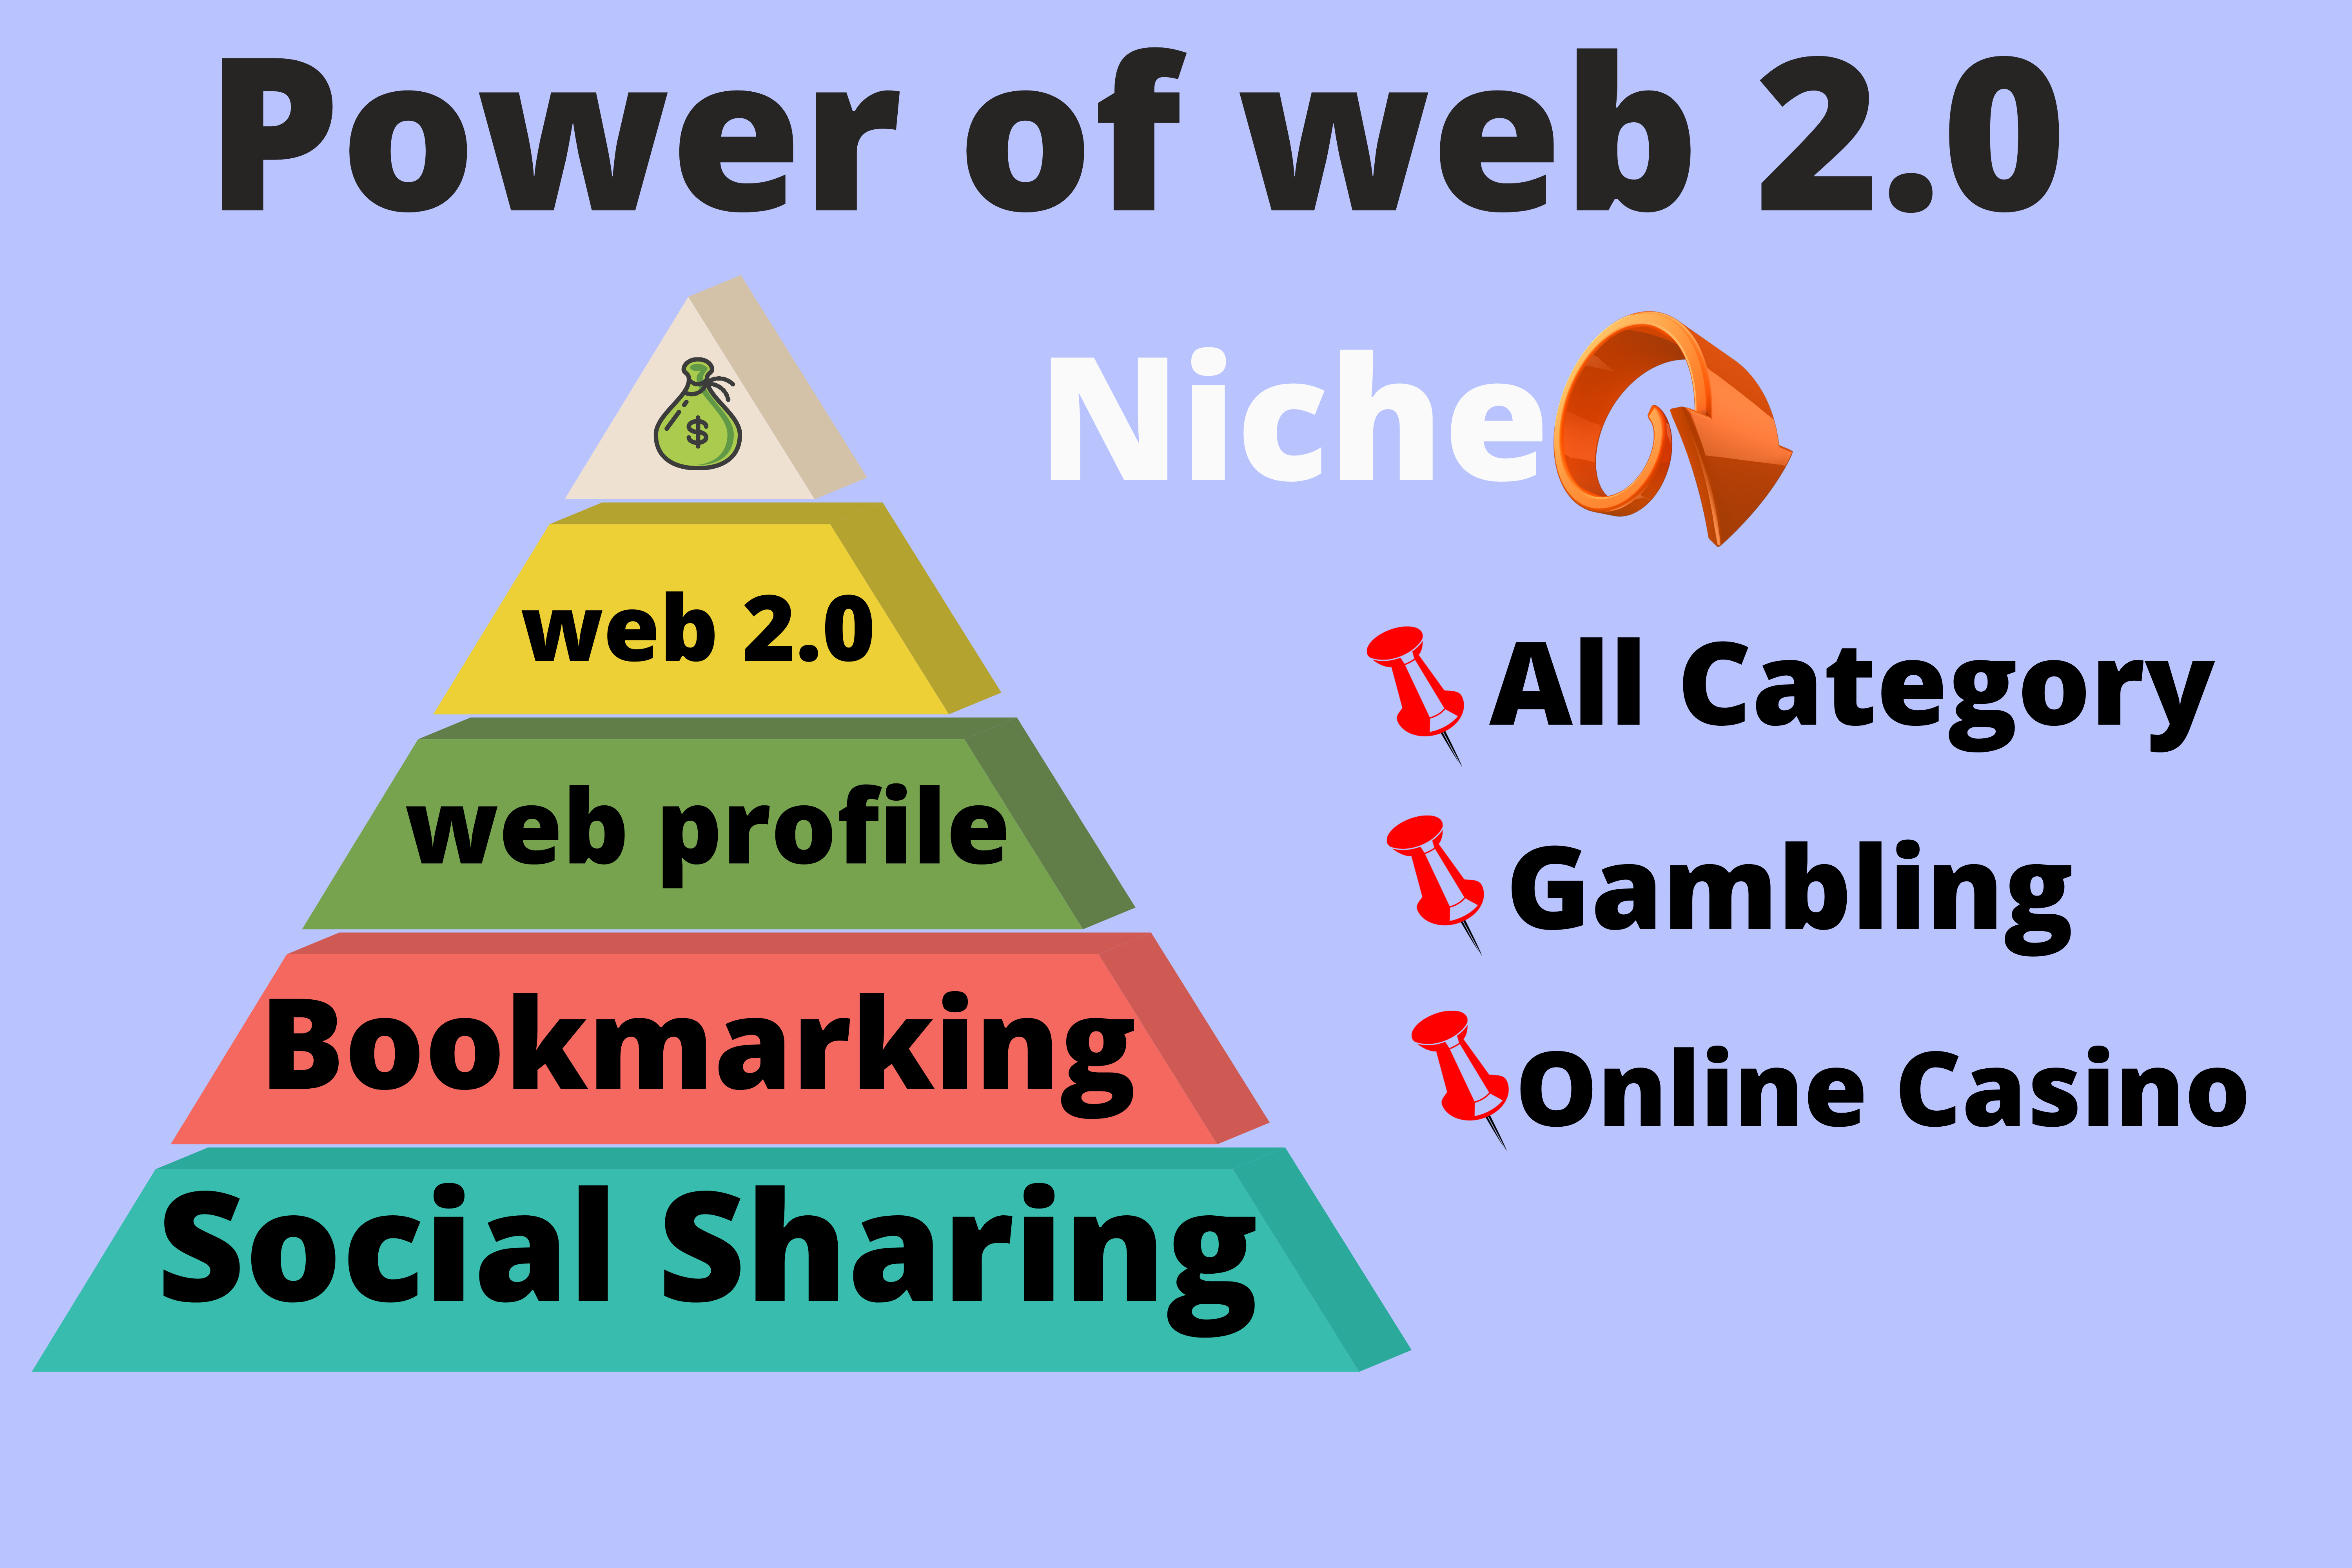 Power of Unlimited Web 2.0 Backlinks Pbn Homepage Article post link pyramid boost your Google Rank 